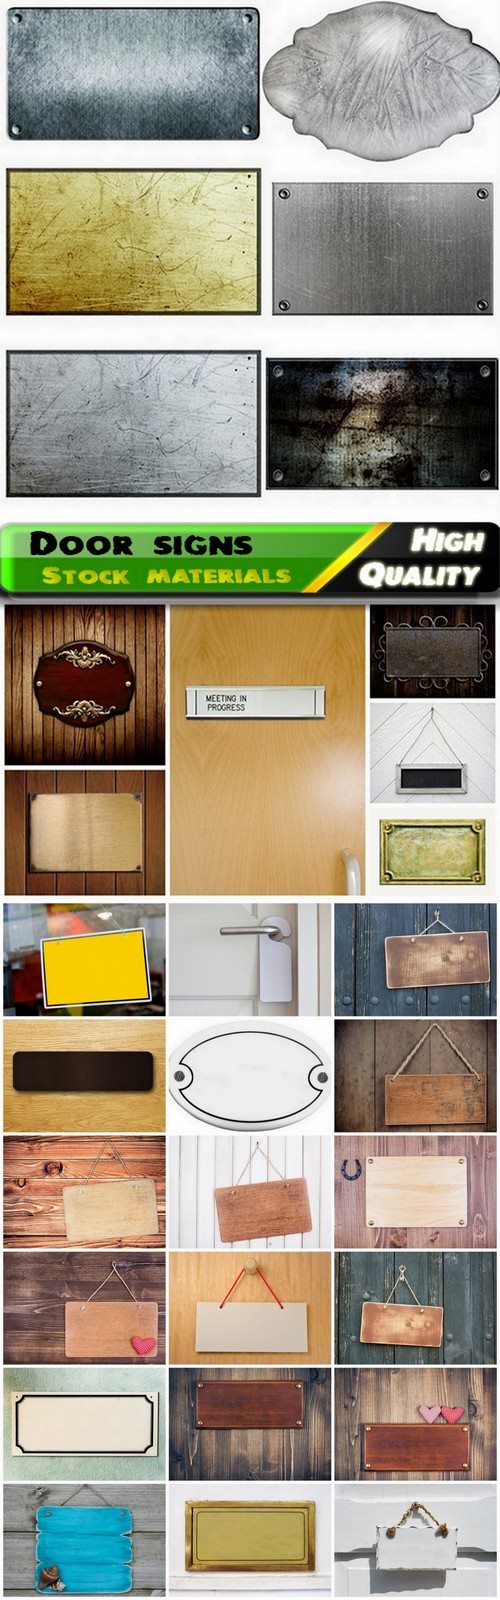 Door sign and tags and shape for text - 25 HQ Jpg